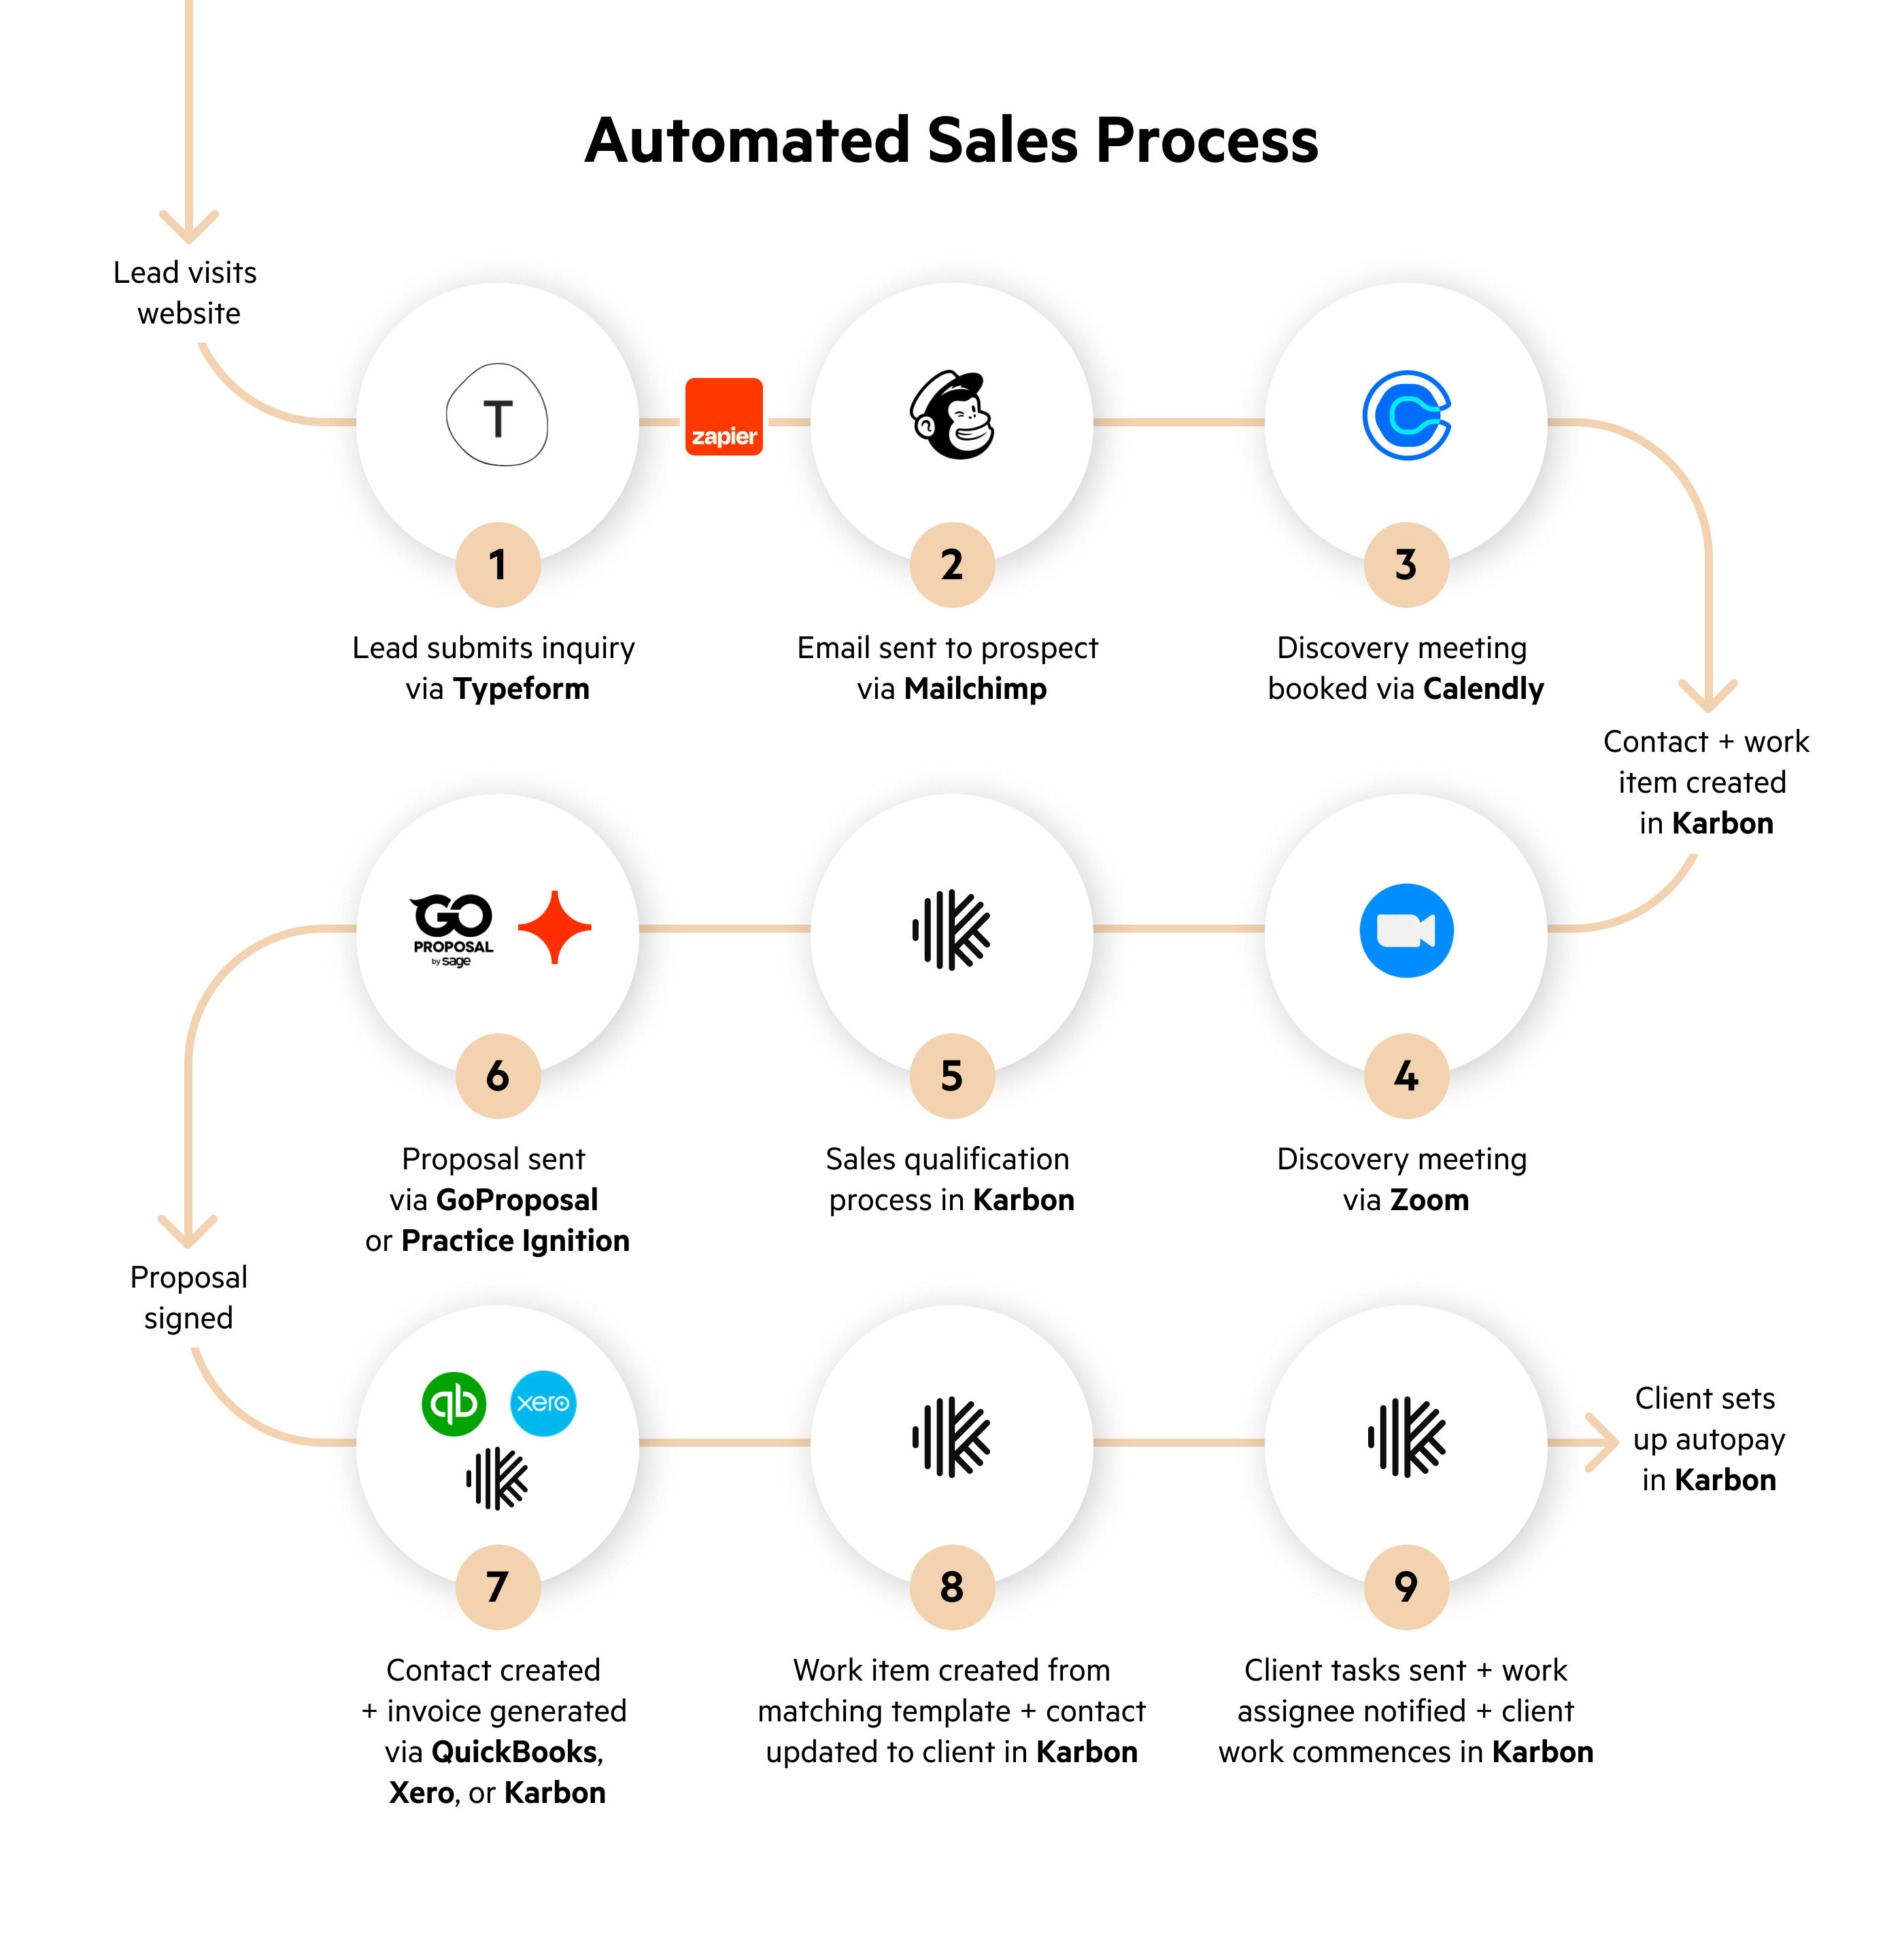 A diagram that illustrates an automated sales process for accounting firms using integrations between Karbon, Zapier, Typeform, Mailchimp, Calendly, Zoom, GoProposal, Ignition, Xero, Quickbooks.